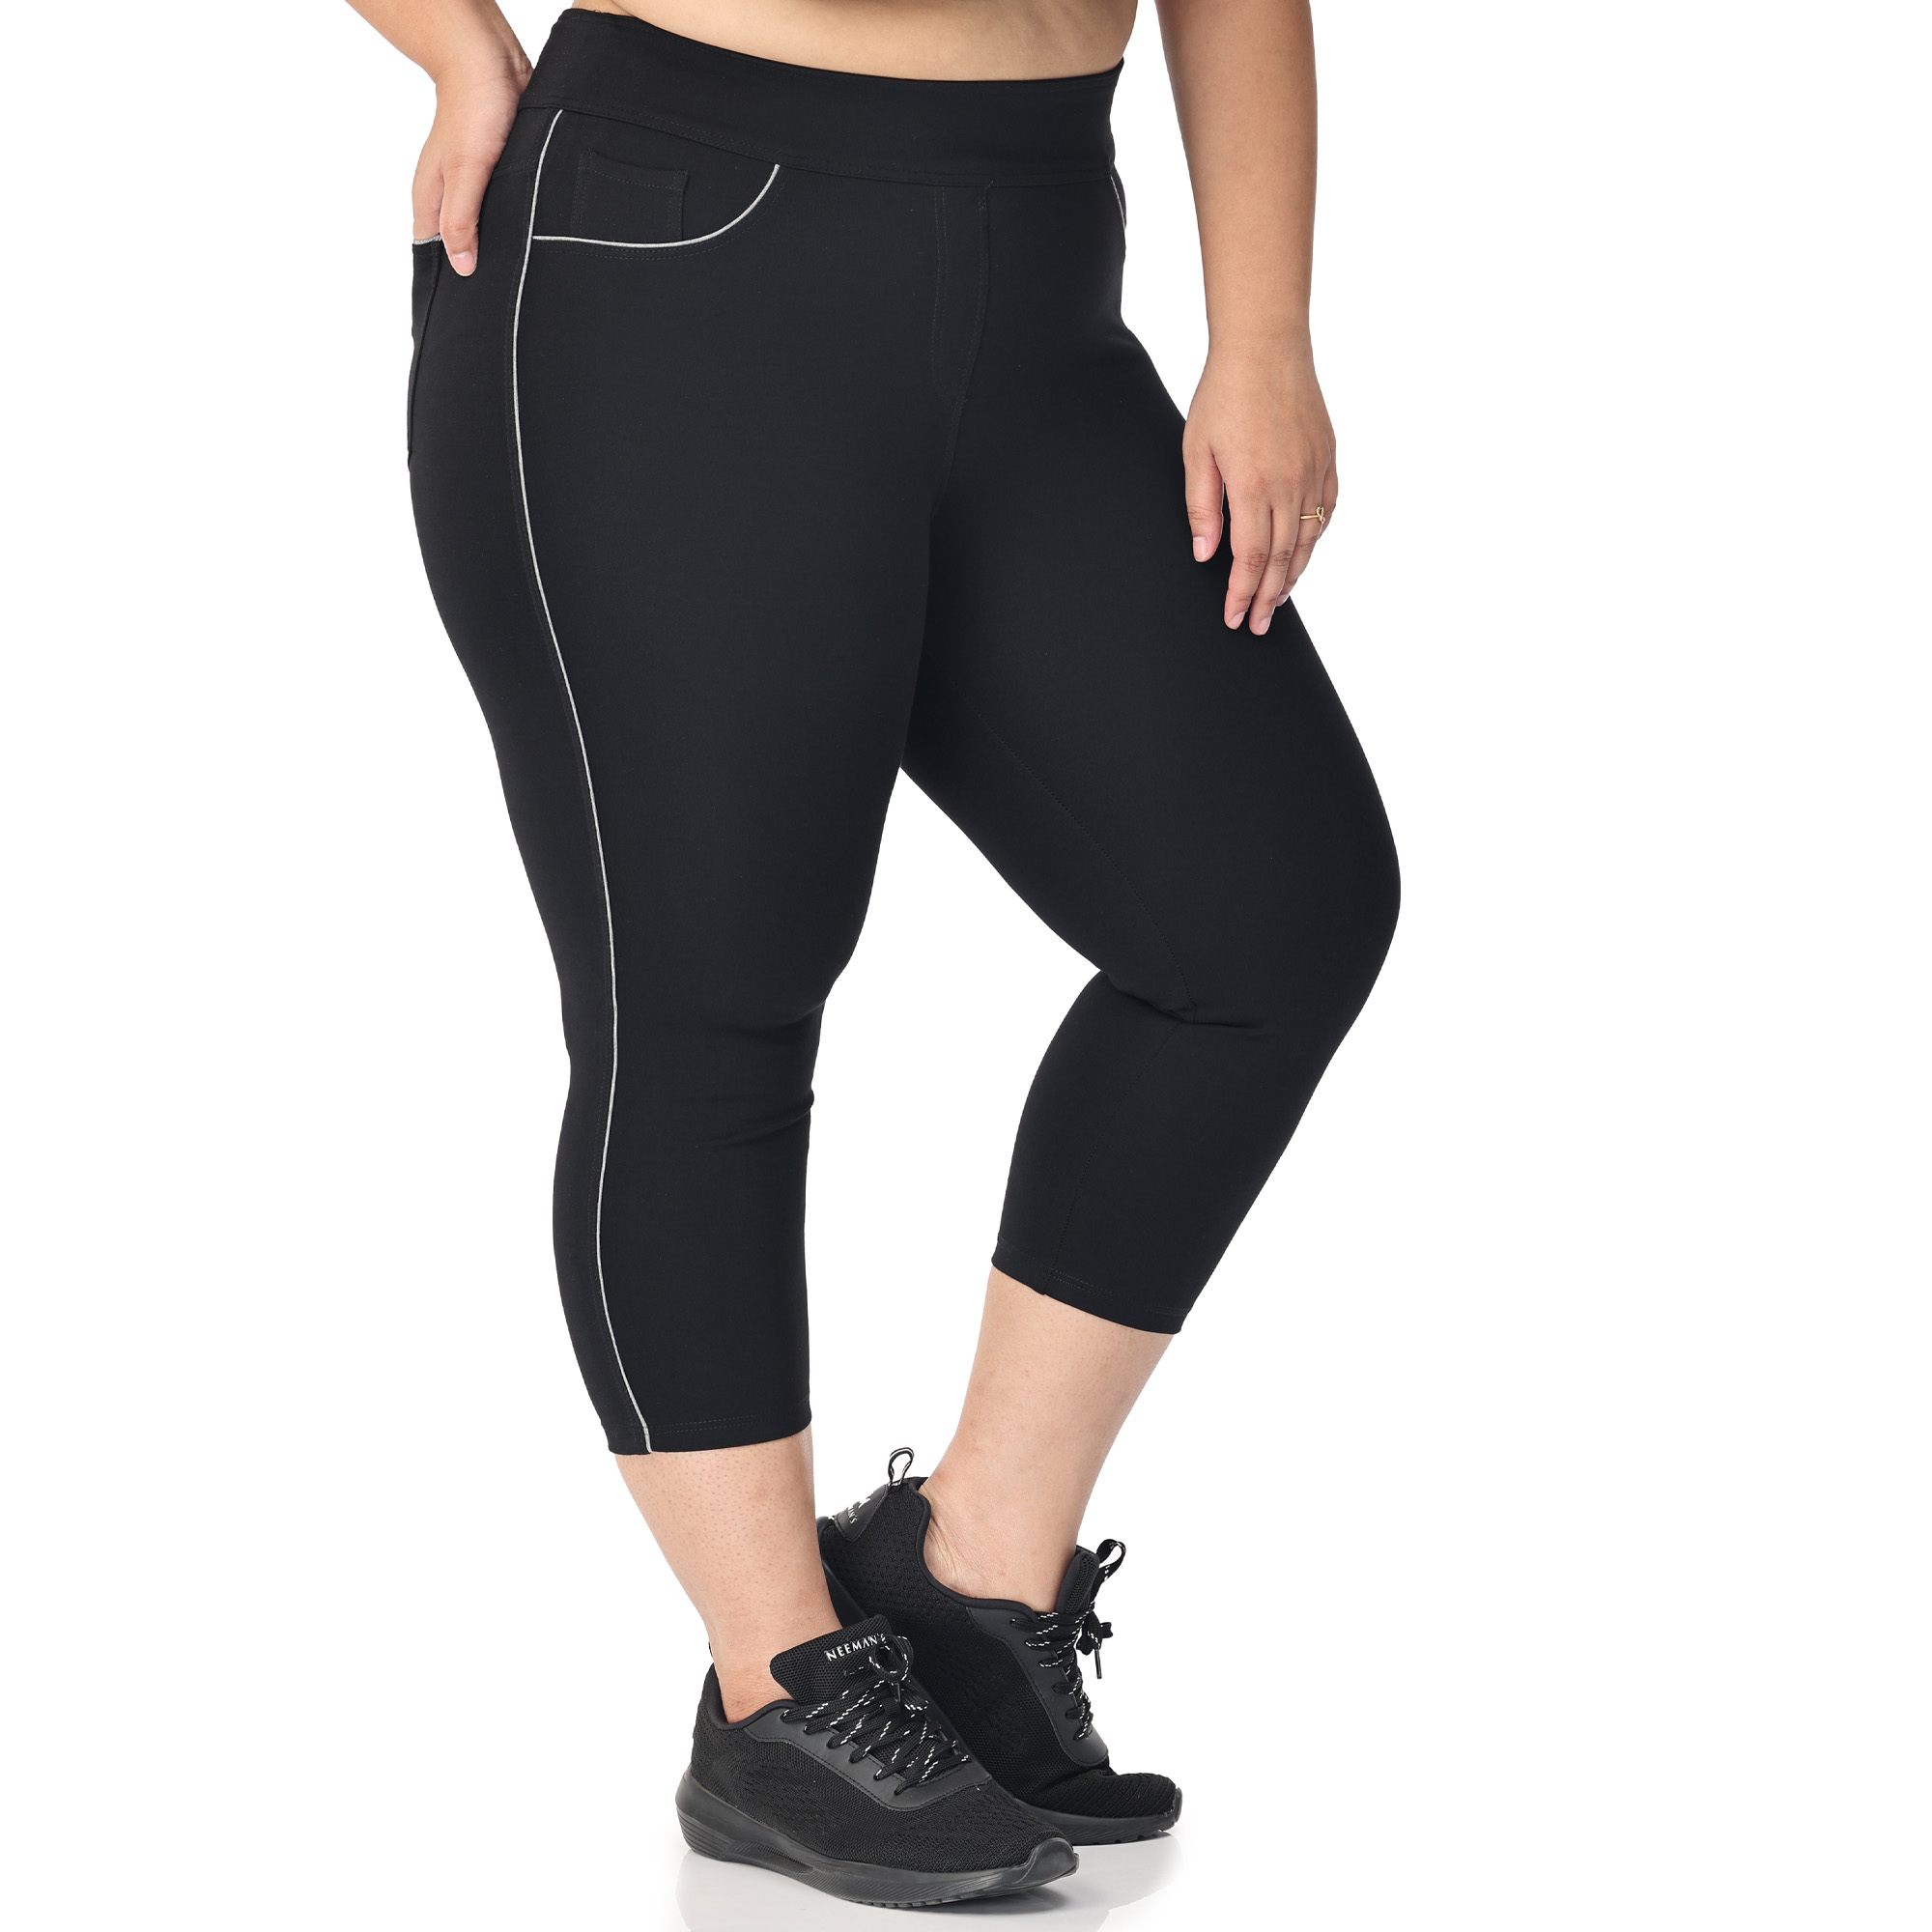 Black capris with piping women gym wear Low rise - Belore Slims